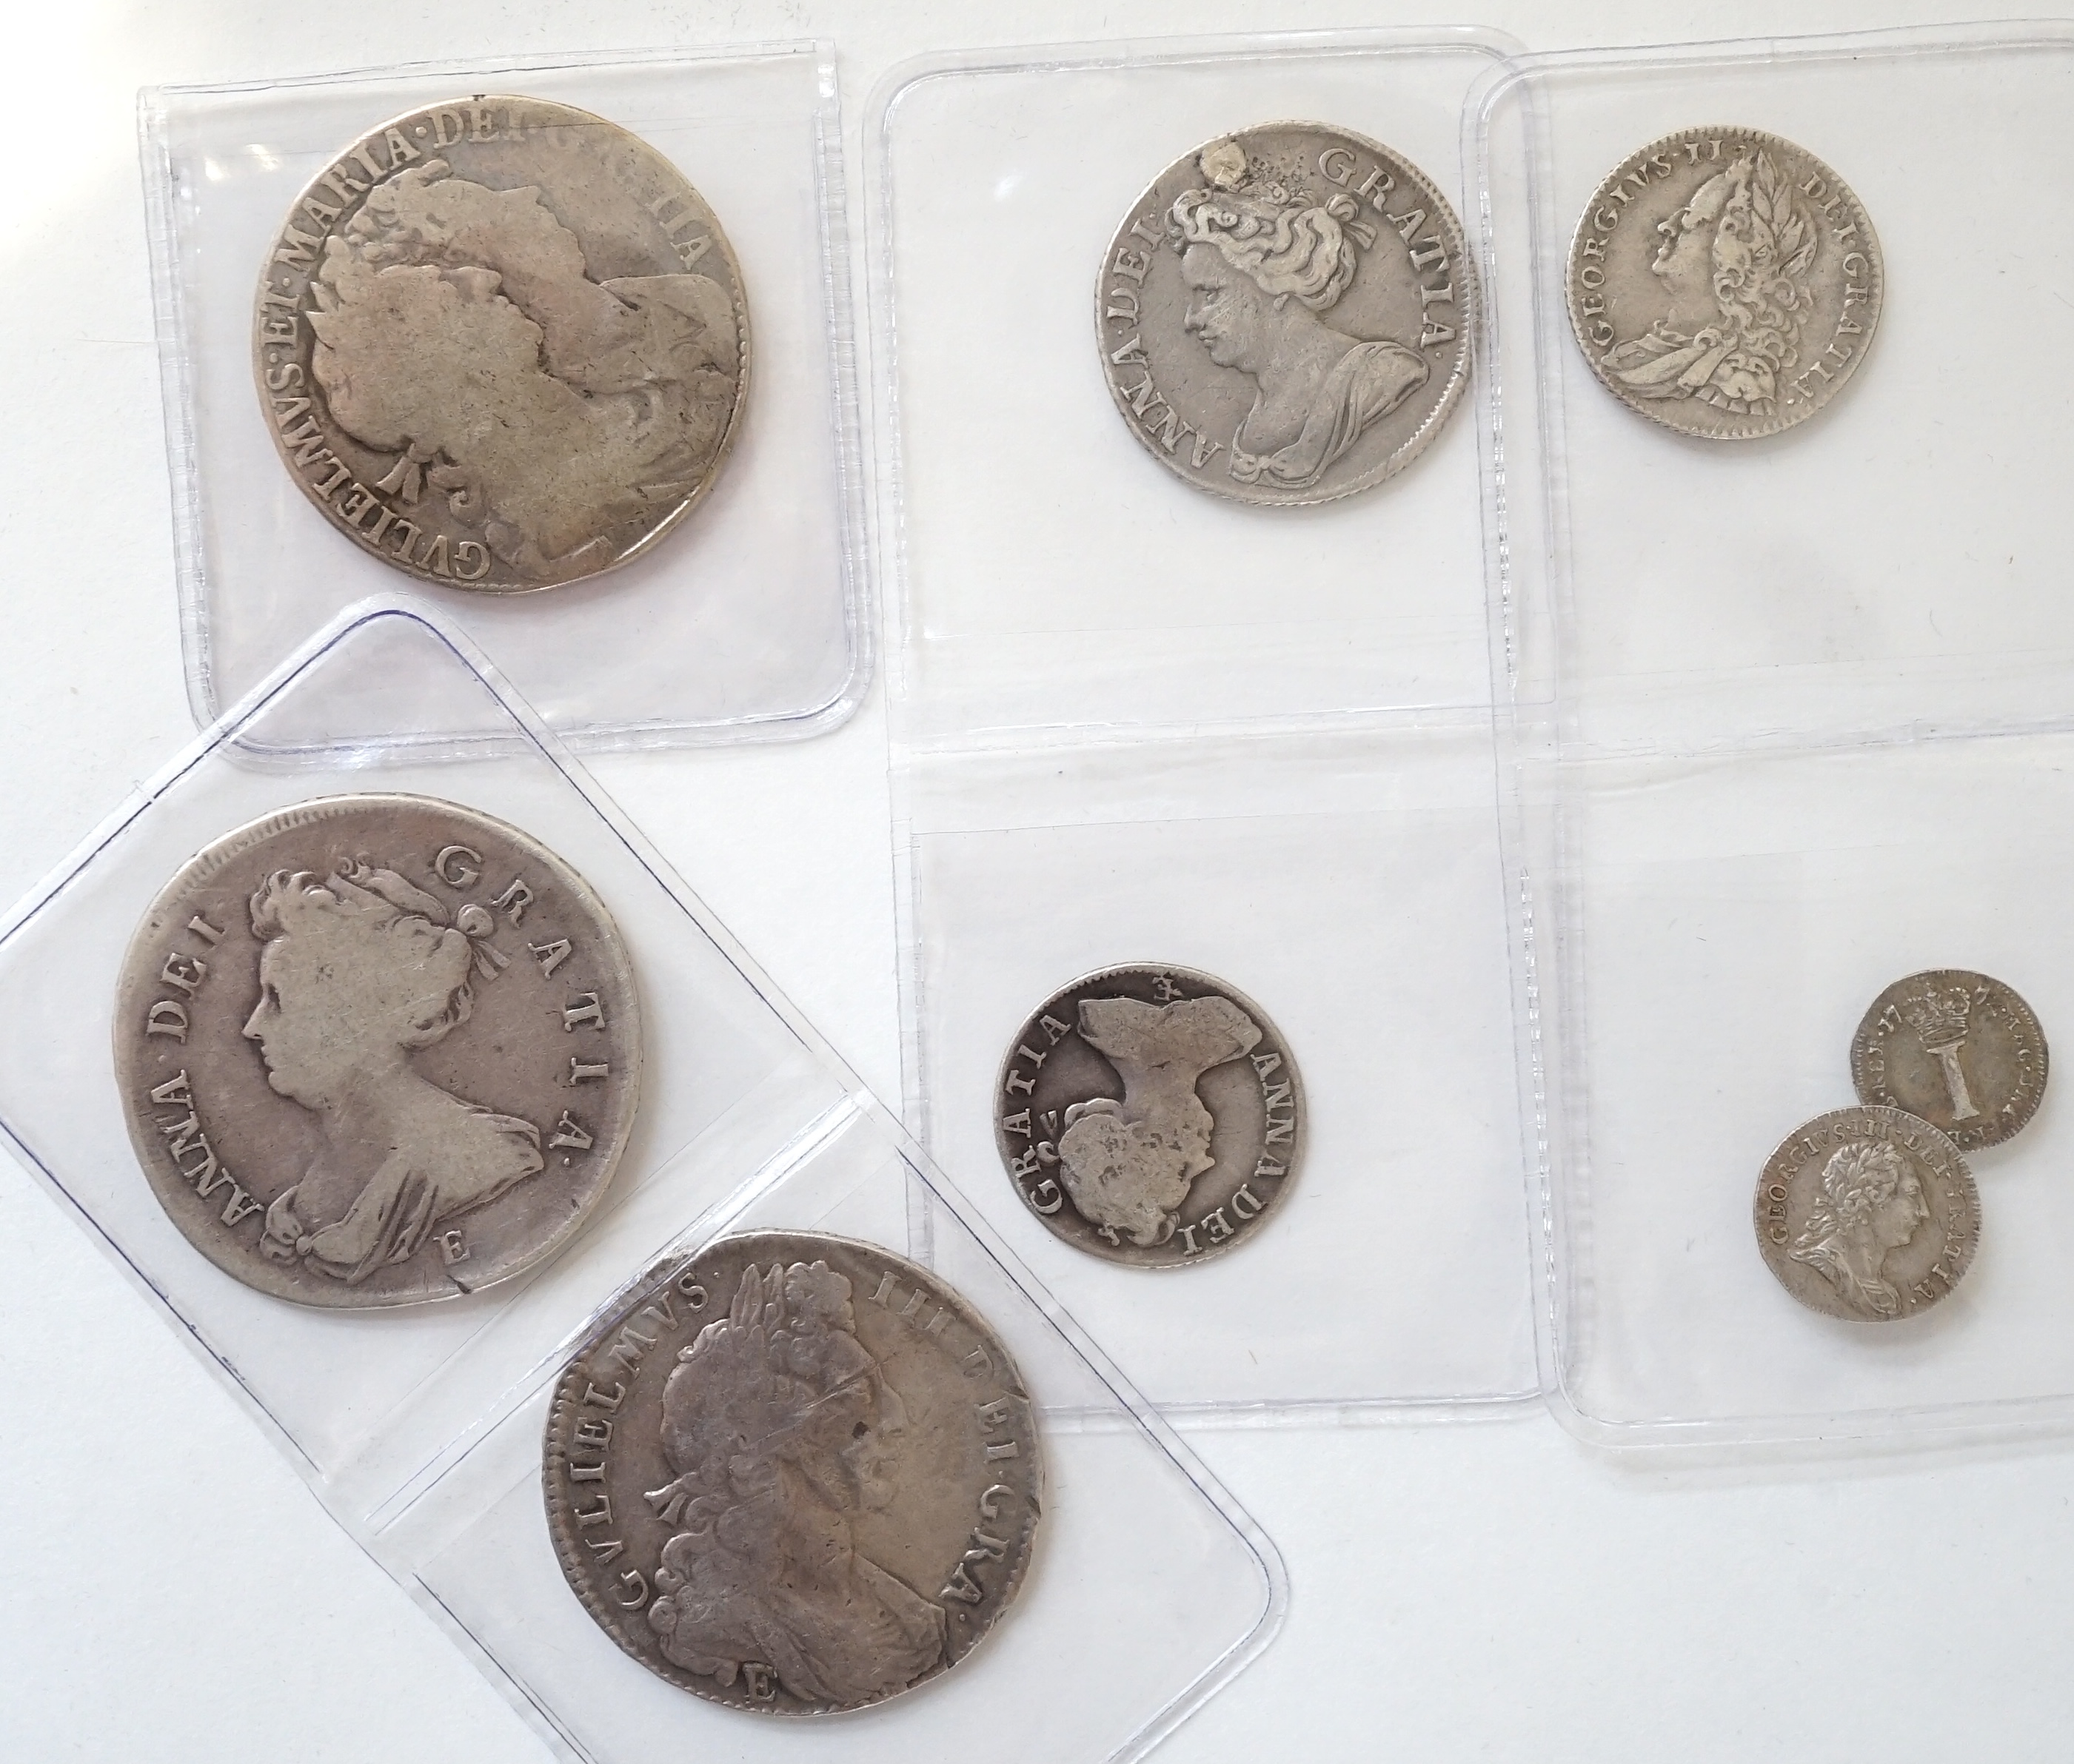 British milled silver coins, Stuart to Georgian, comprising William and Mary and halfcrown, 1689, William III halfcrown, 1697E, Anne halfcrown, 1707E, shilling, 1711, plugged hole otherwise fine, sixpence, 1708E, George